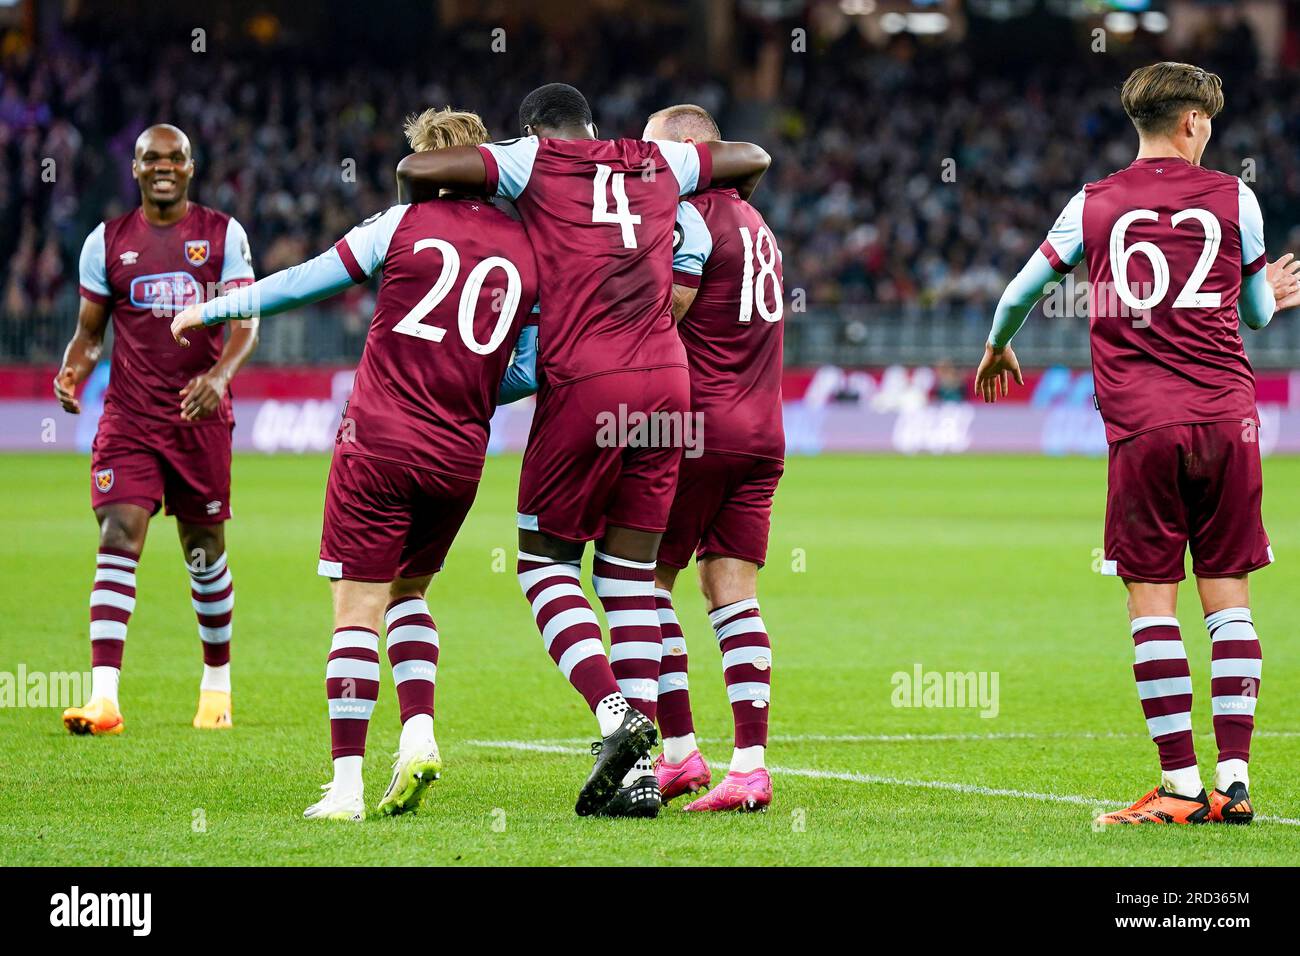 Perth, Australia. 18th July, 2023. Australia, Perth, July 18th 2023: Danny Ings (18 West Ham) celebrates with teammates after scoring his team's first goal during the International Friendly football match between Tottenham Hotspur and West Ham United at Optus Stadium in Perth, Australia. (Daniela Porcelli/SPP) Credit: SPP Sport Press Photo. /Alamy Live News Stock Photo